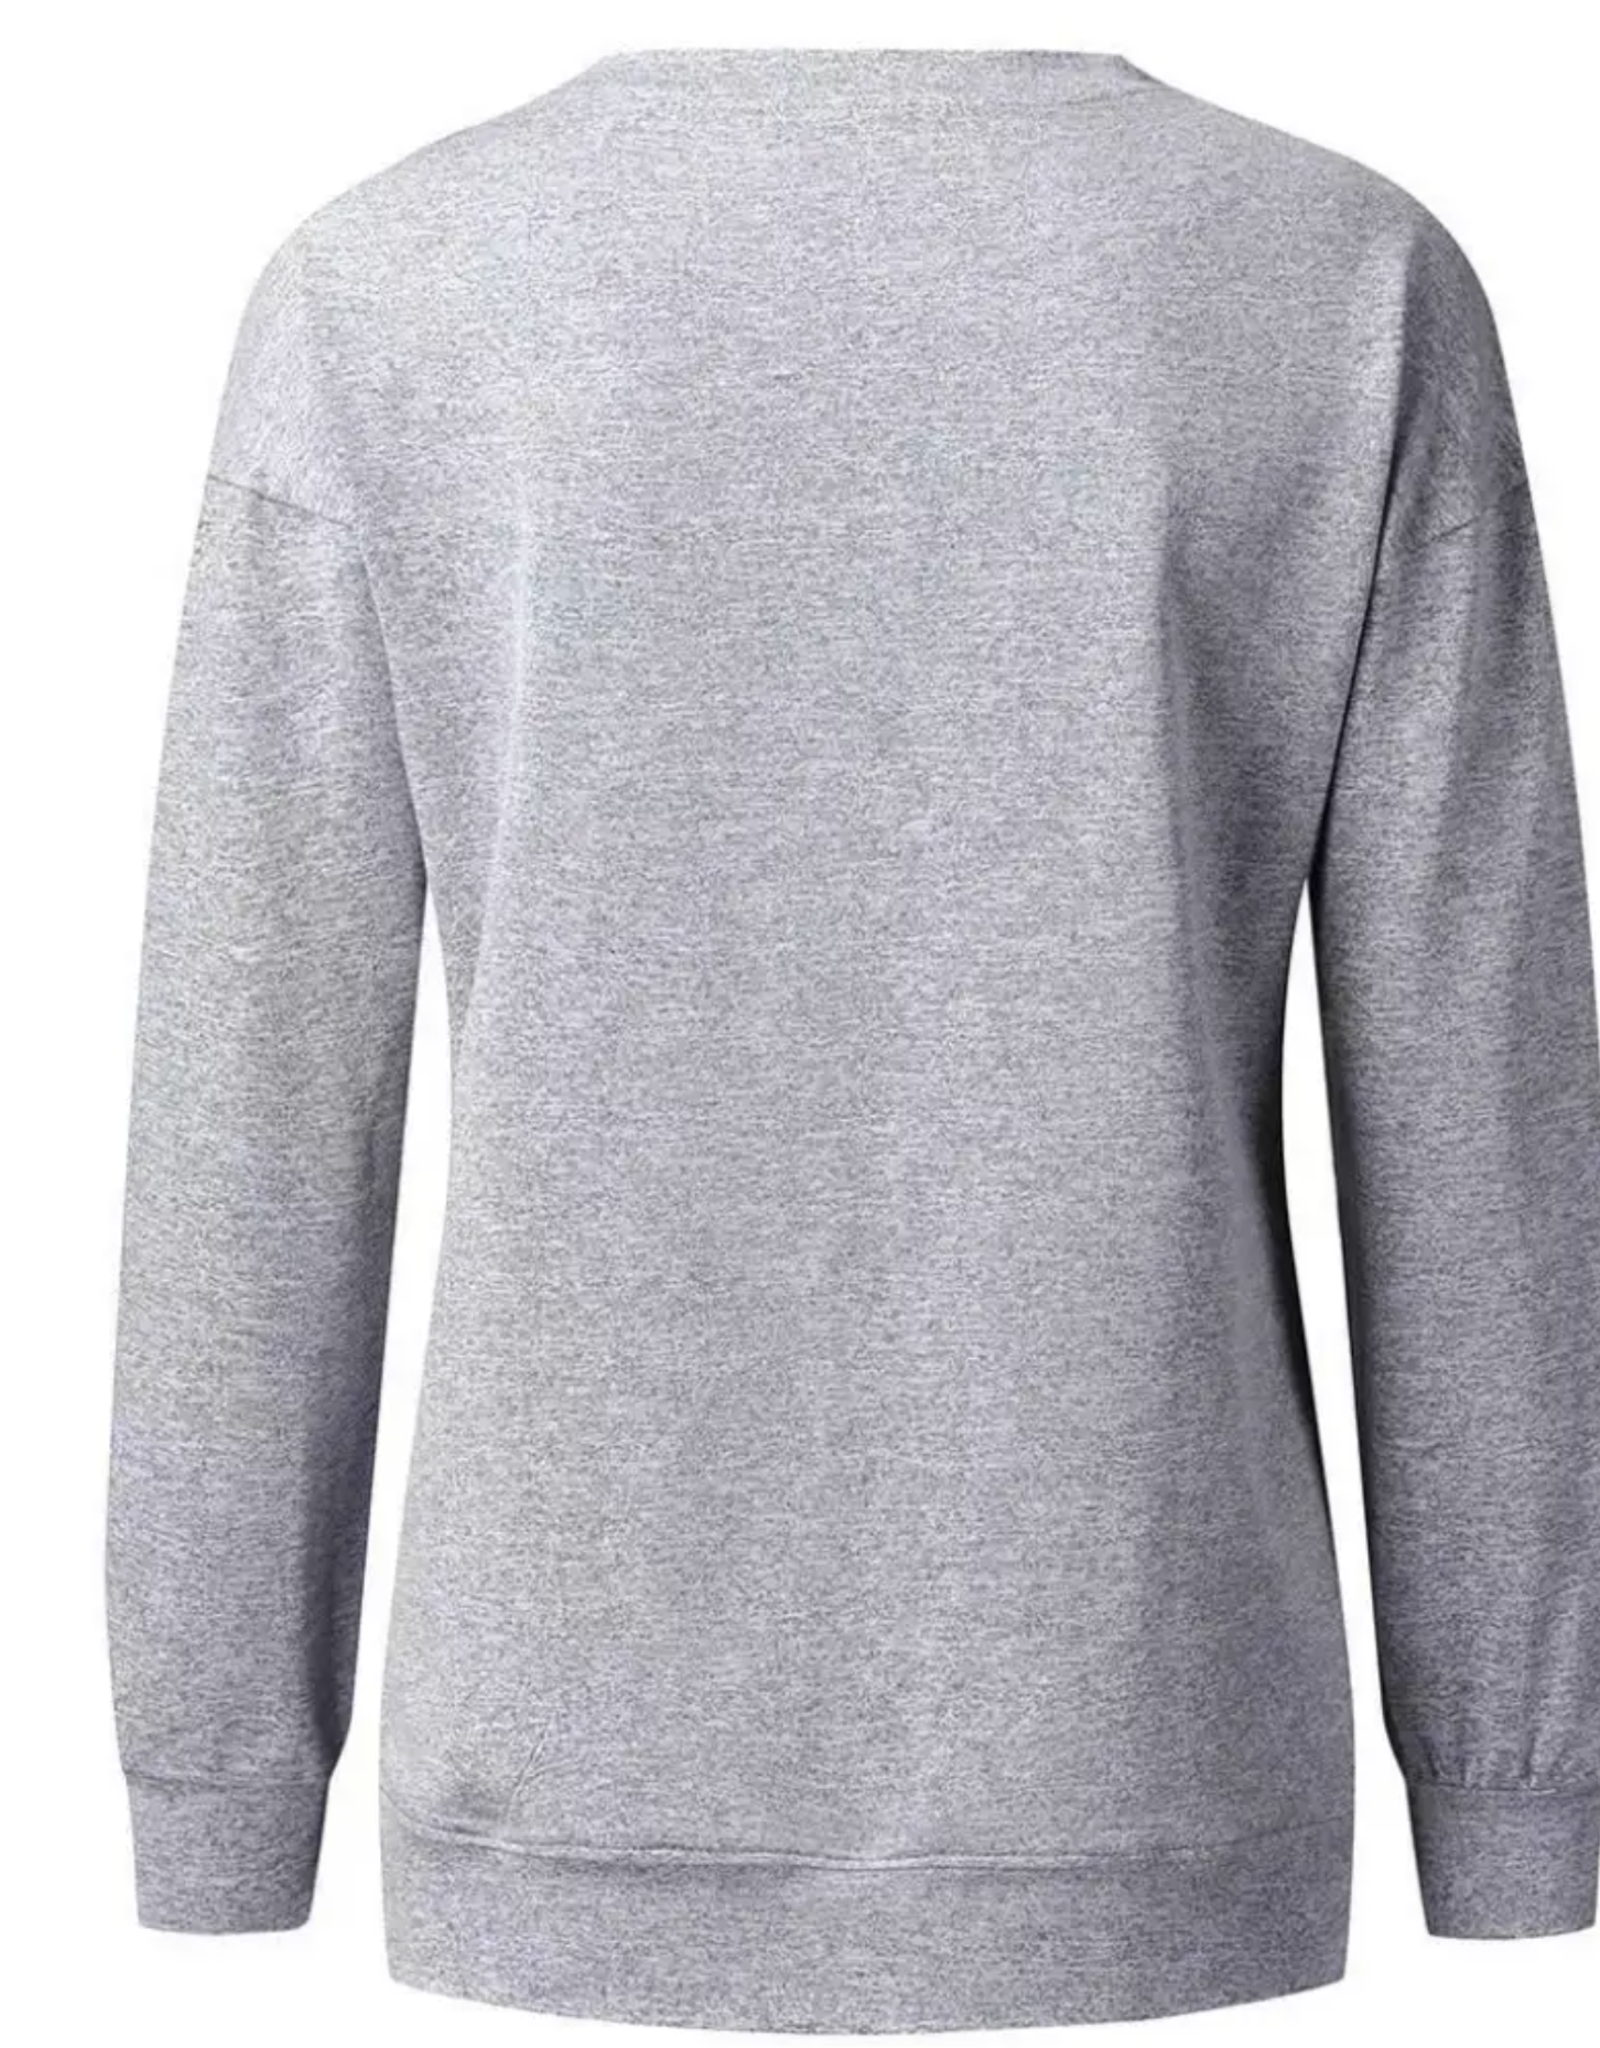 The Moment Collection Valentine Heart Pullover Sweatshirt - Grey